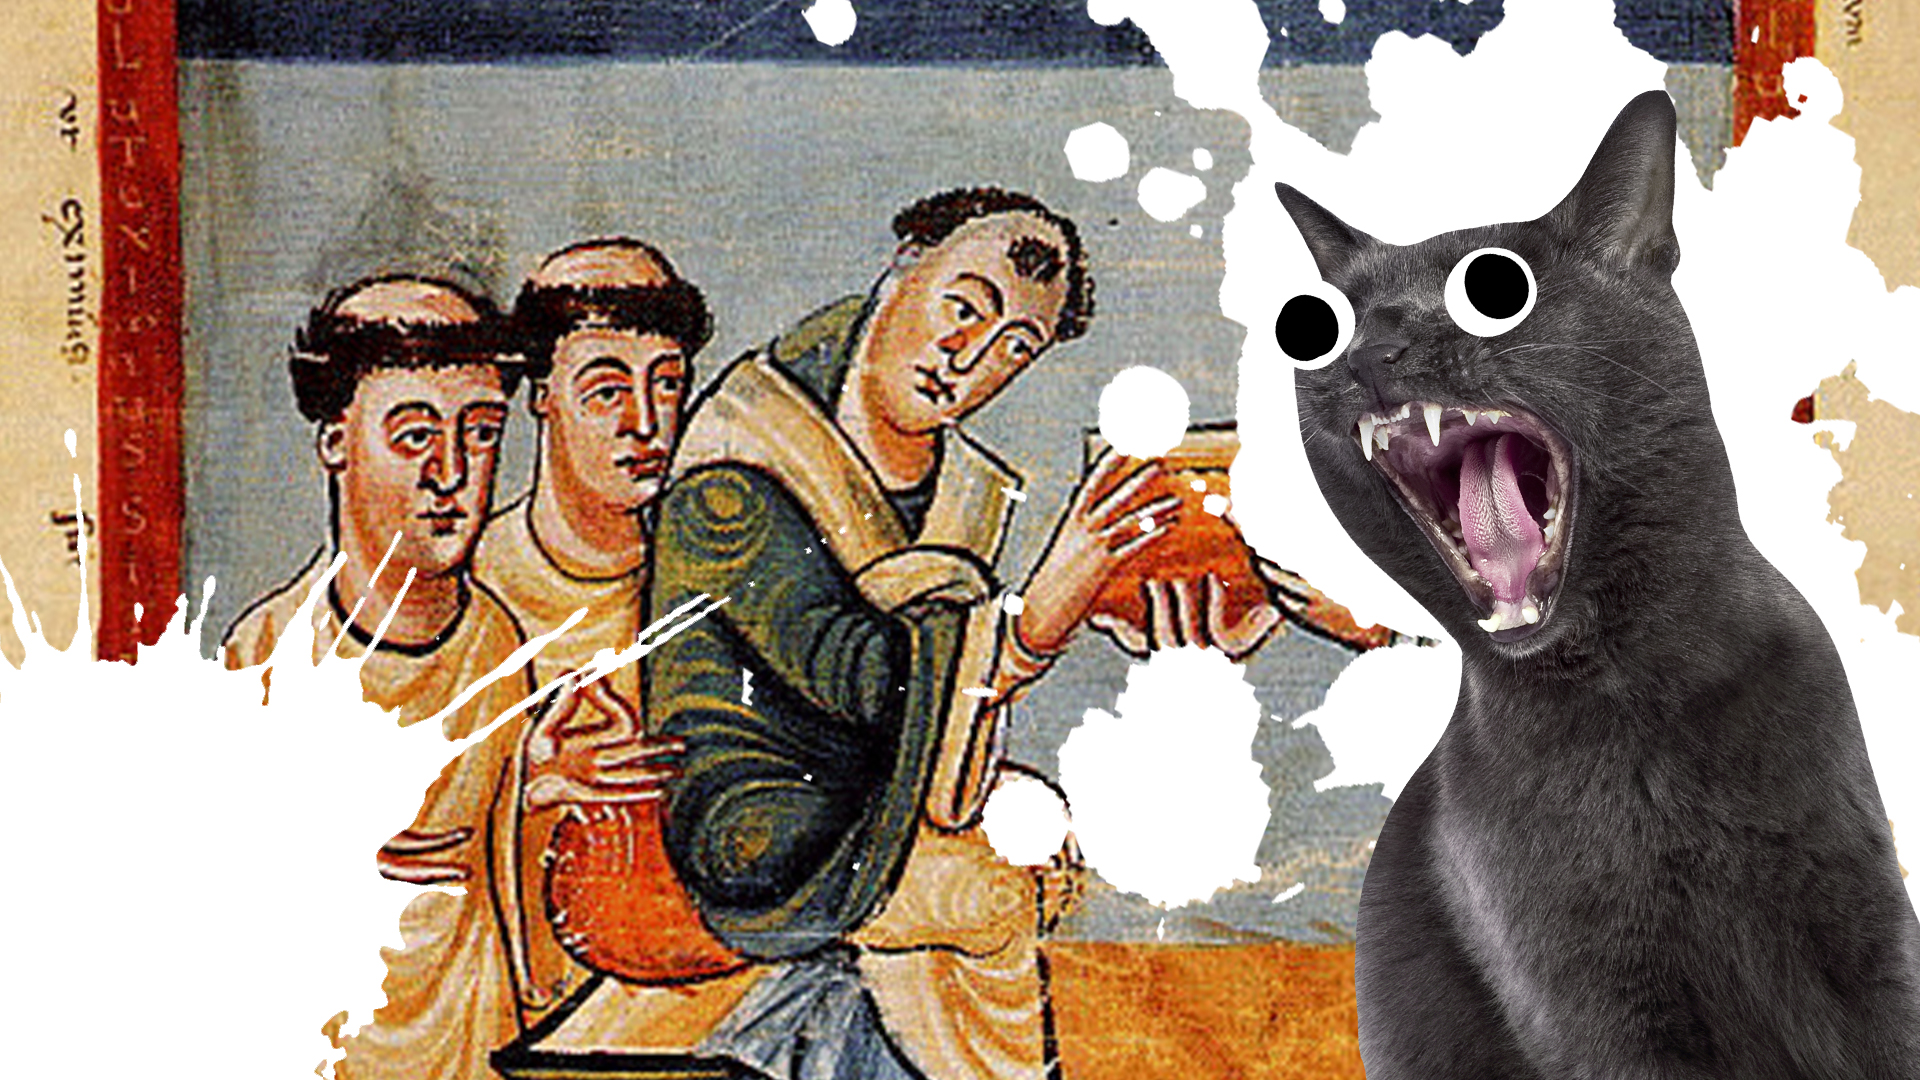 A religious painting and a cat